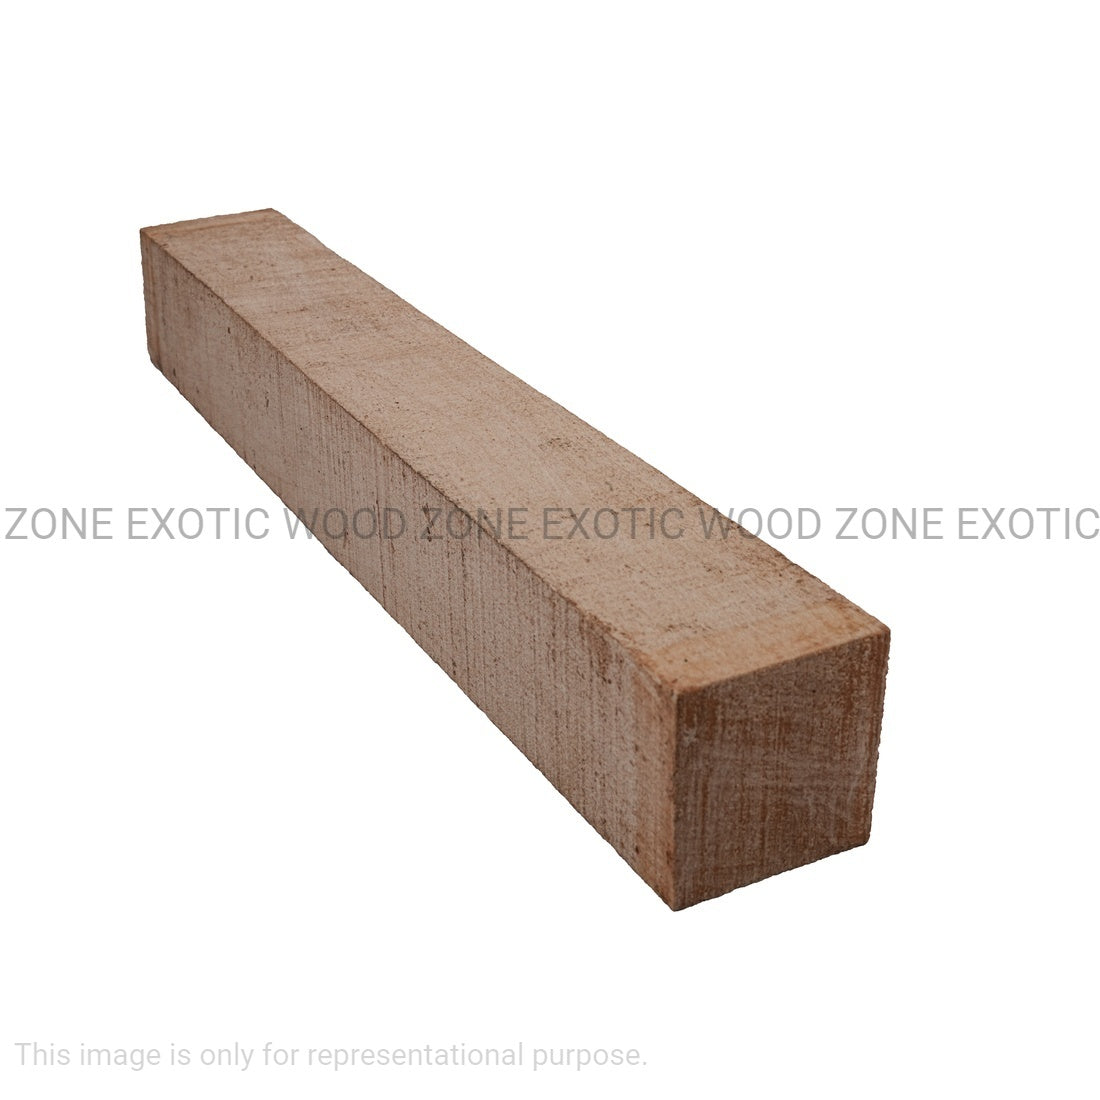 Pack of 2, Hard Maple Turning Wood Blanks 1-1/2 x 1-1/2 x 12 inches - Exotic Wood Zone - Buy online Across USA 